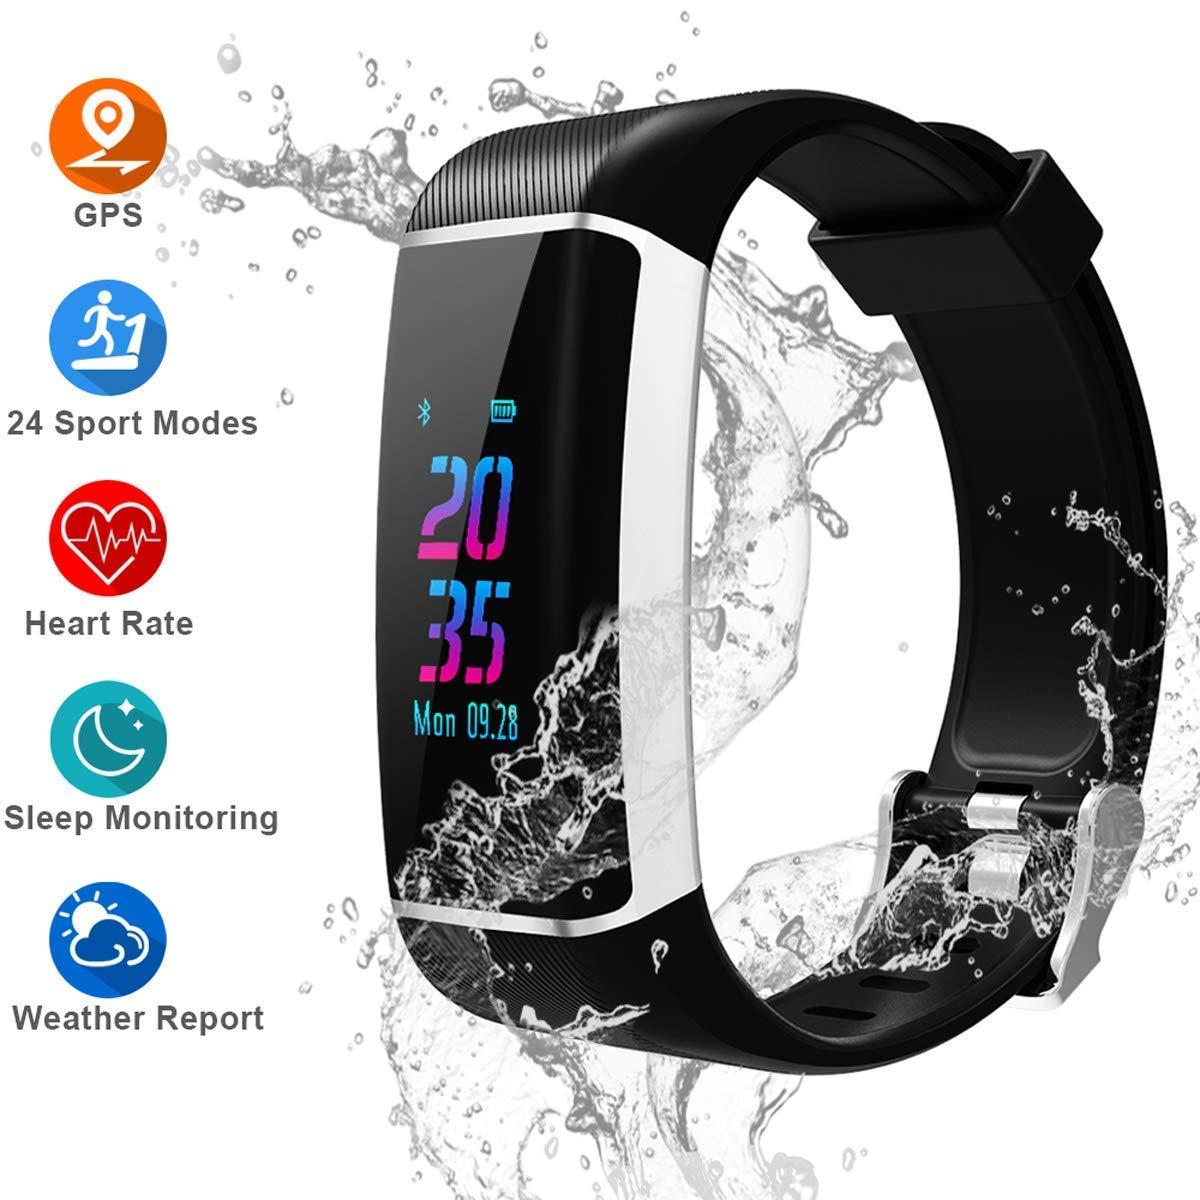  Huawei Band 2 Pro All-in-One Activity Tracker Smart Fitness  Wristband, GPS, Multi-Sport Mode, Heart Rate, Sleep Monitor